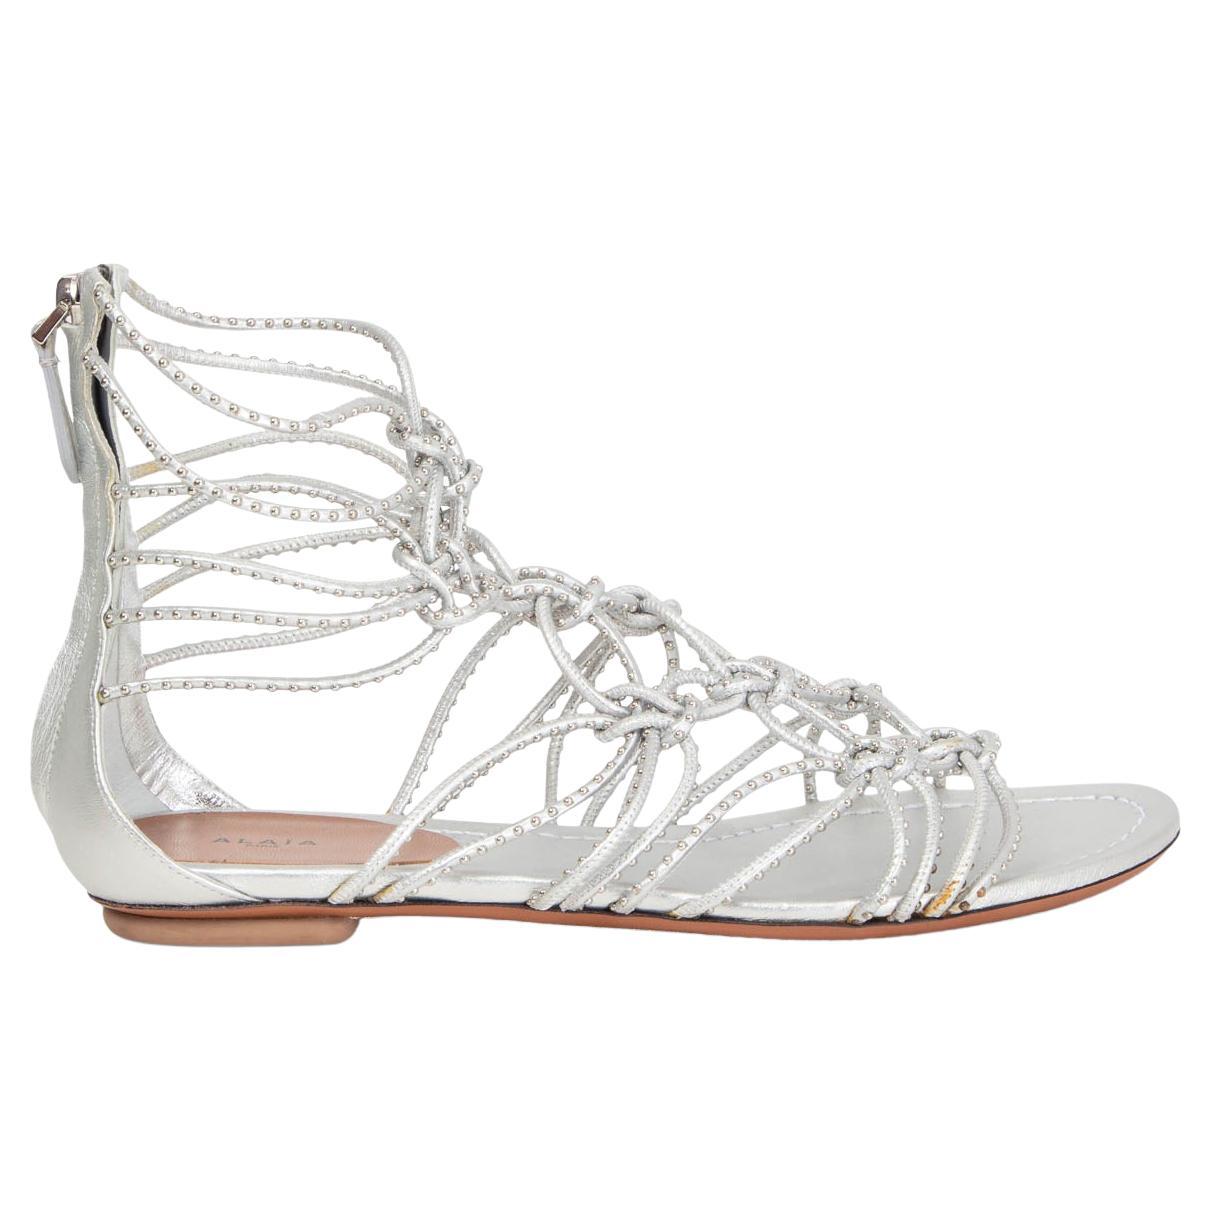 ALAIA metallic silver STUDDED CAGED GLADIATOR Sandals Shoes 38